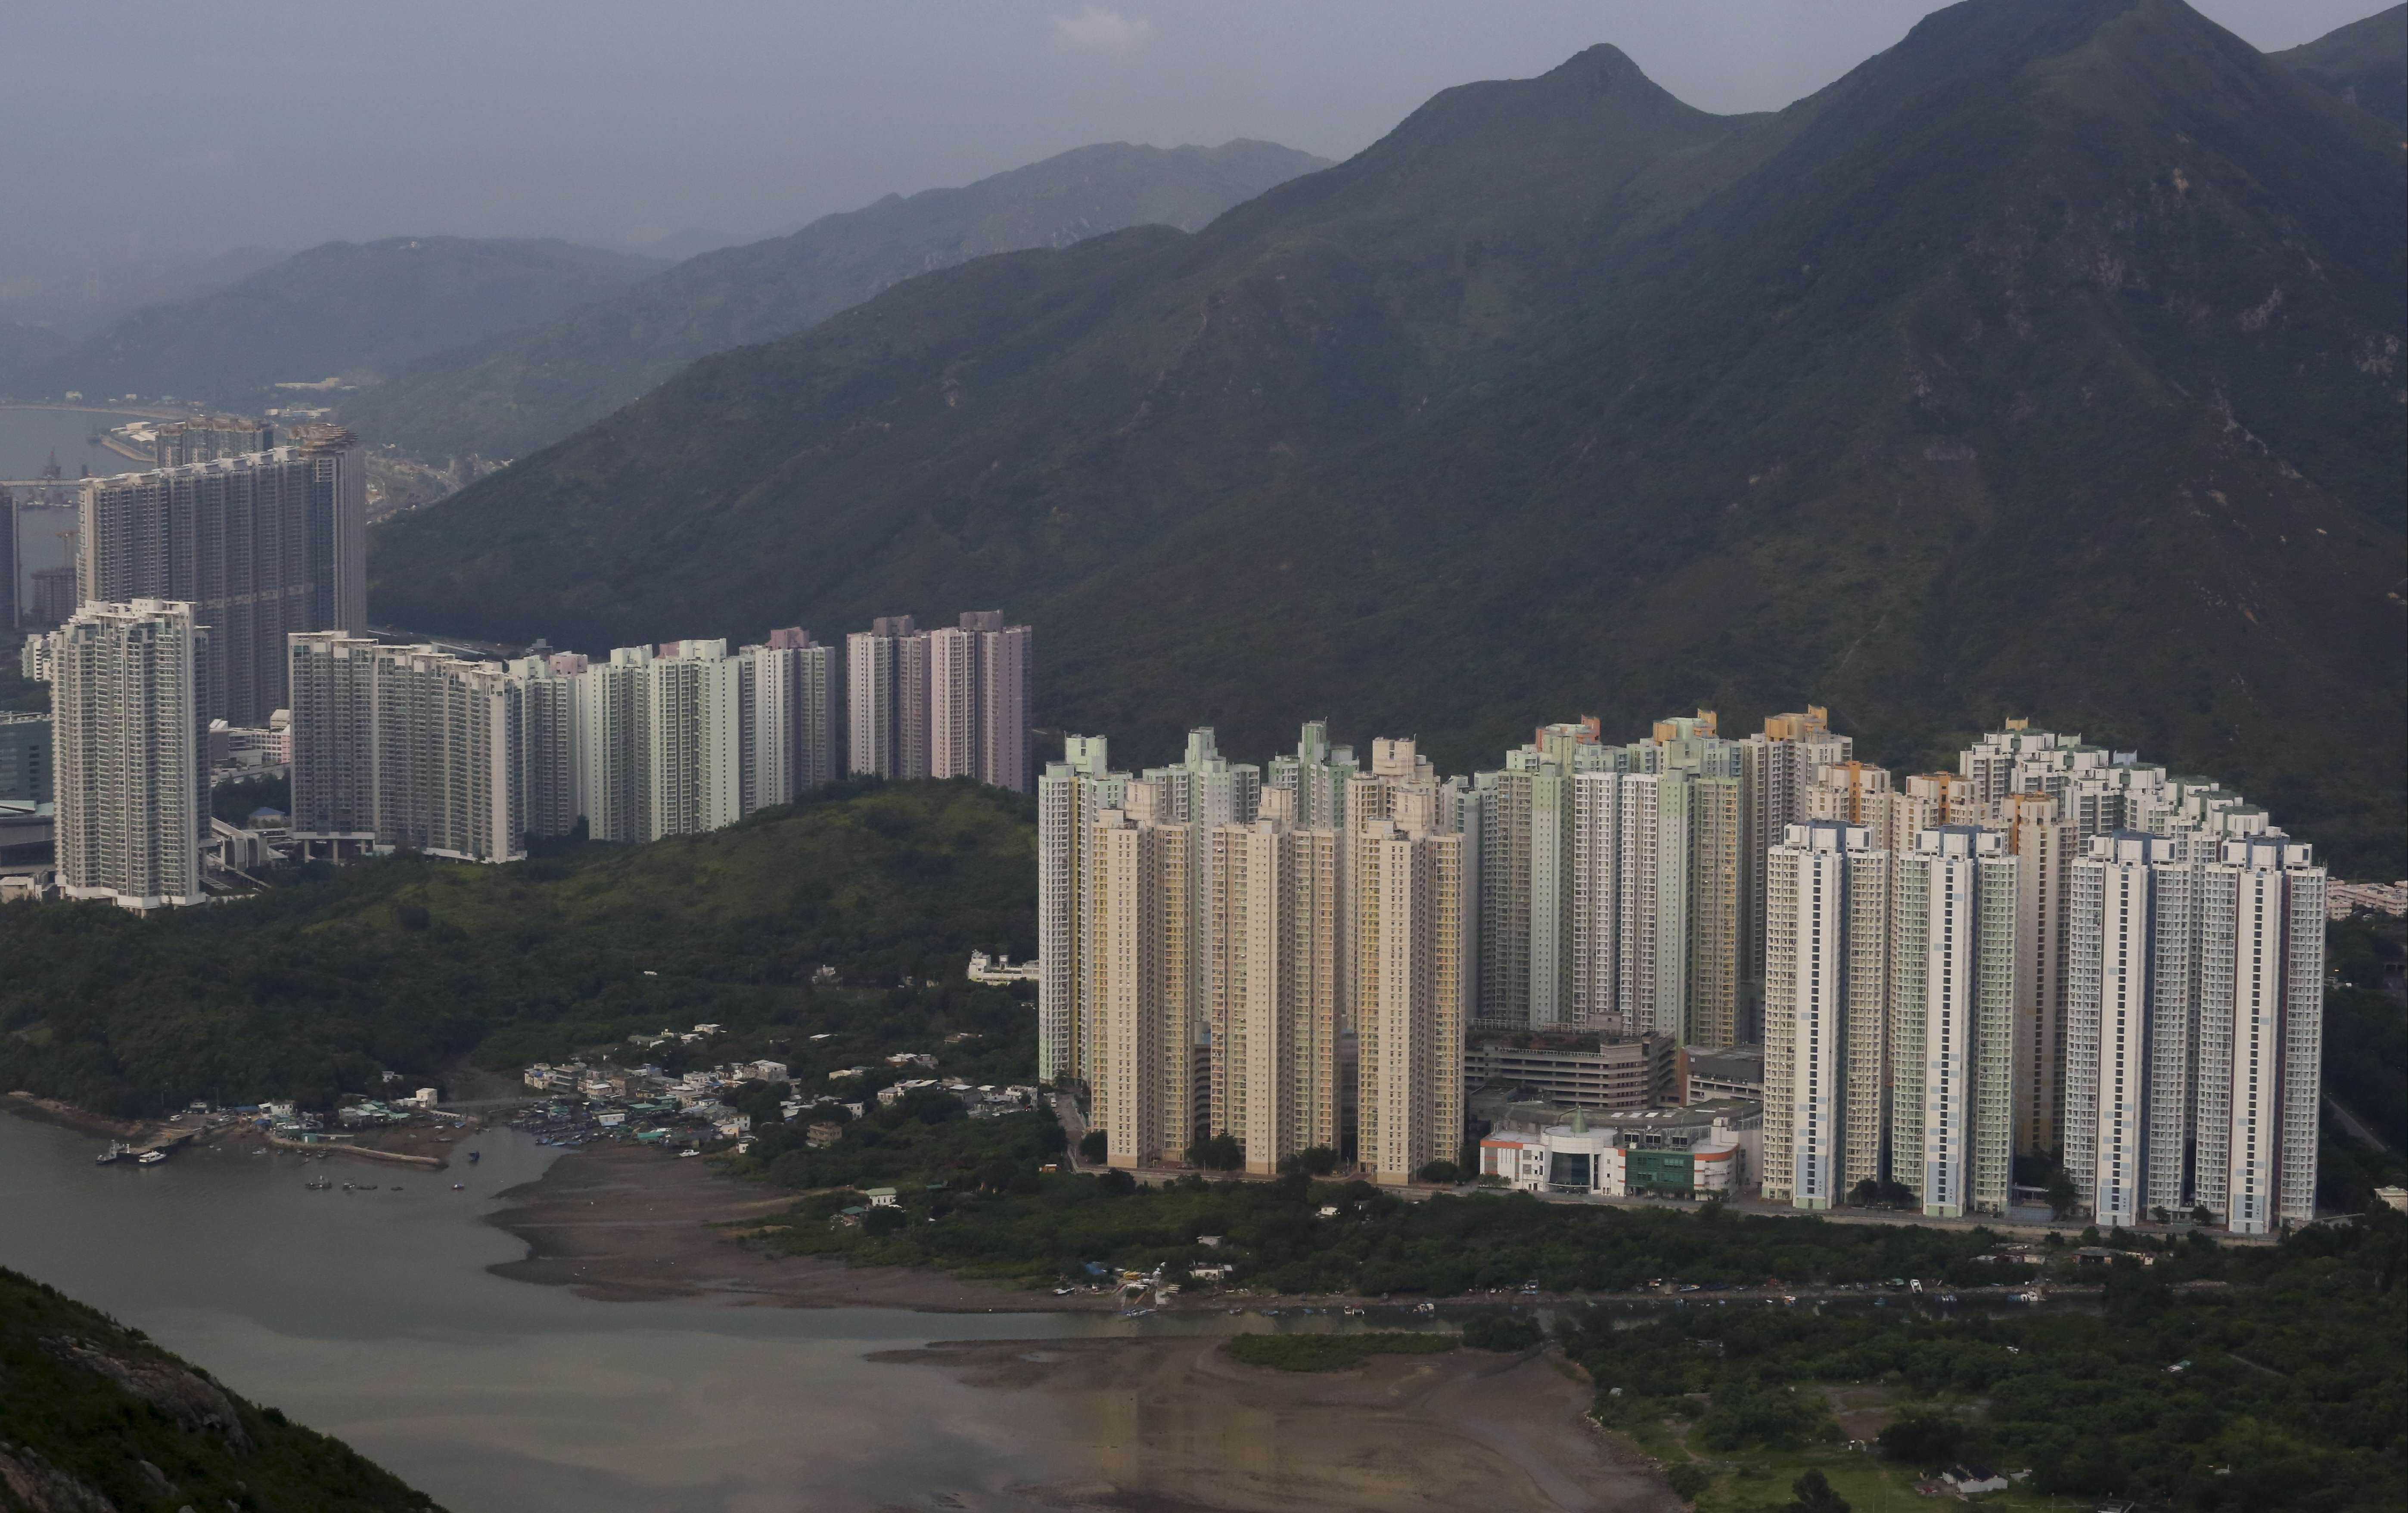 Tung Chung new town seen from the cable car. The basin of the encircling hills in which the town is situated traps pollution and shuts out prevailing winds. Photo: Felix Wong